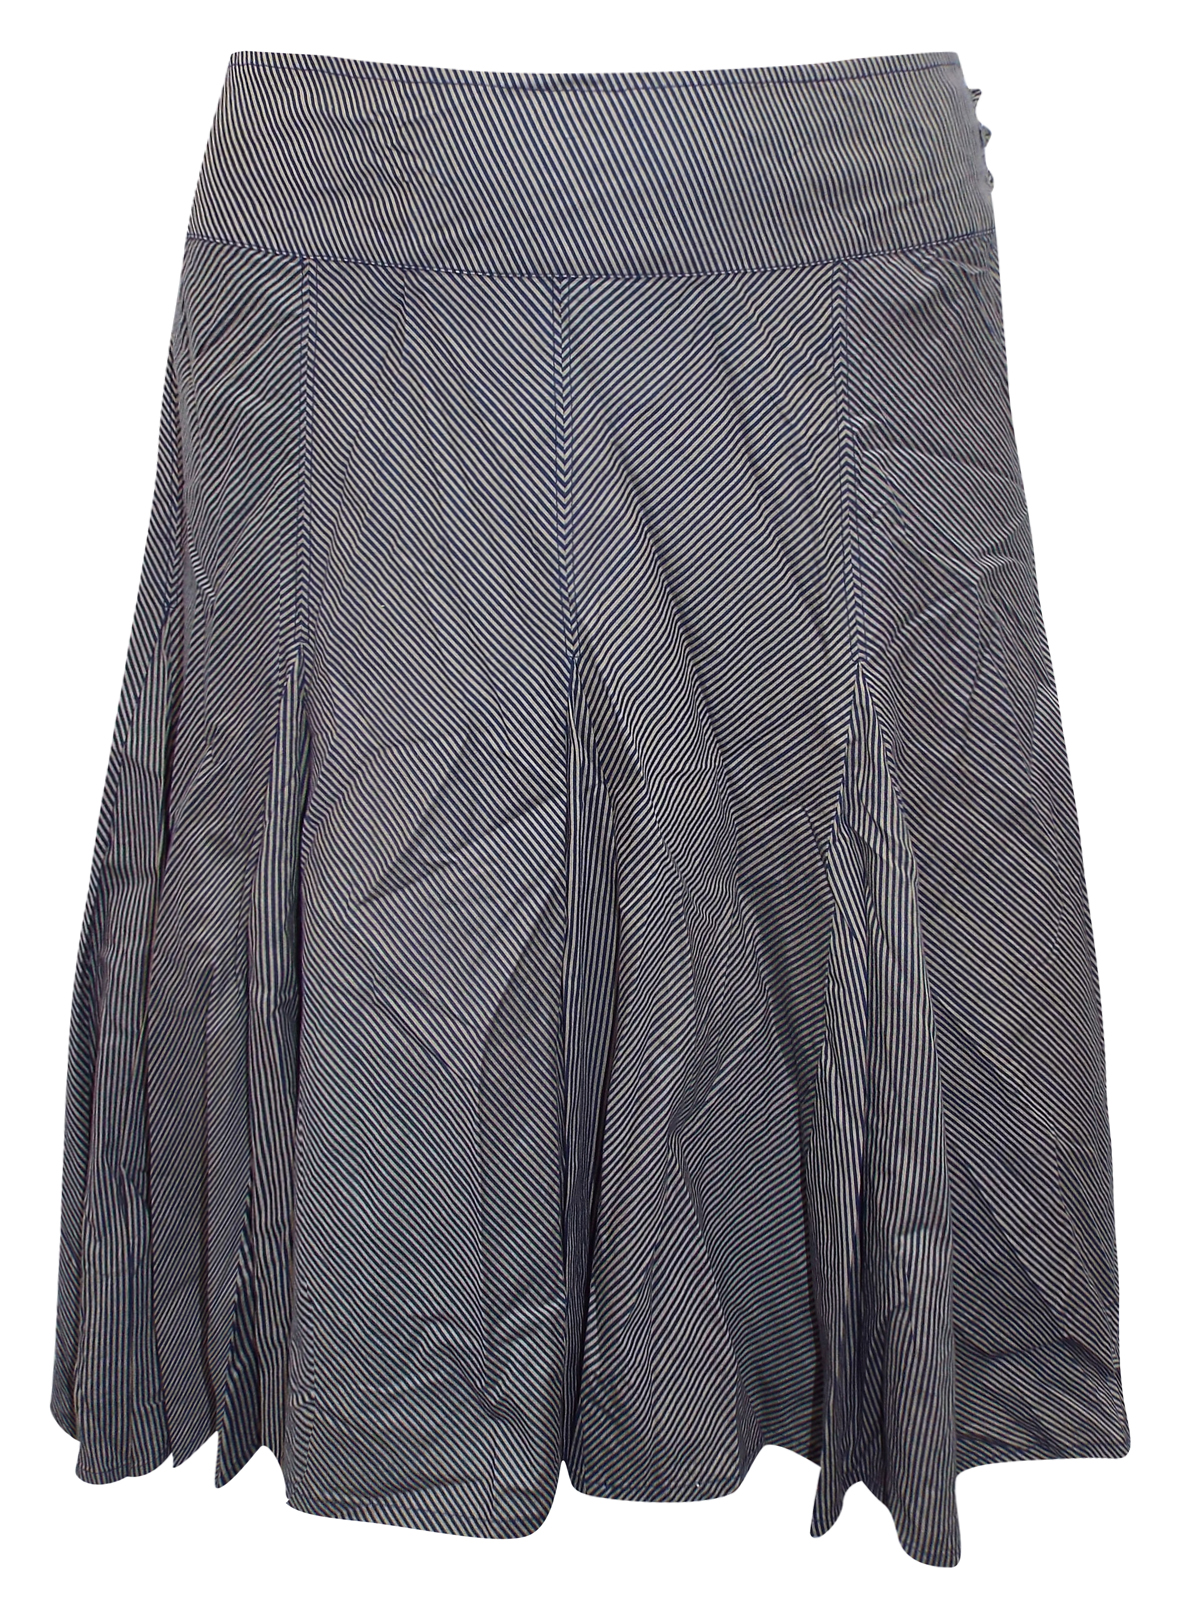 M0nsoon ASSORTED Ladies Skirts - Plus Size 16 to 22